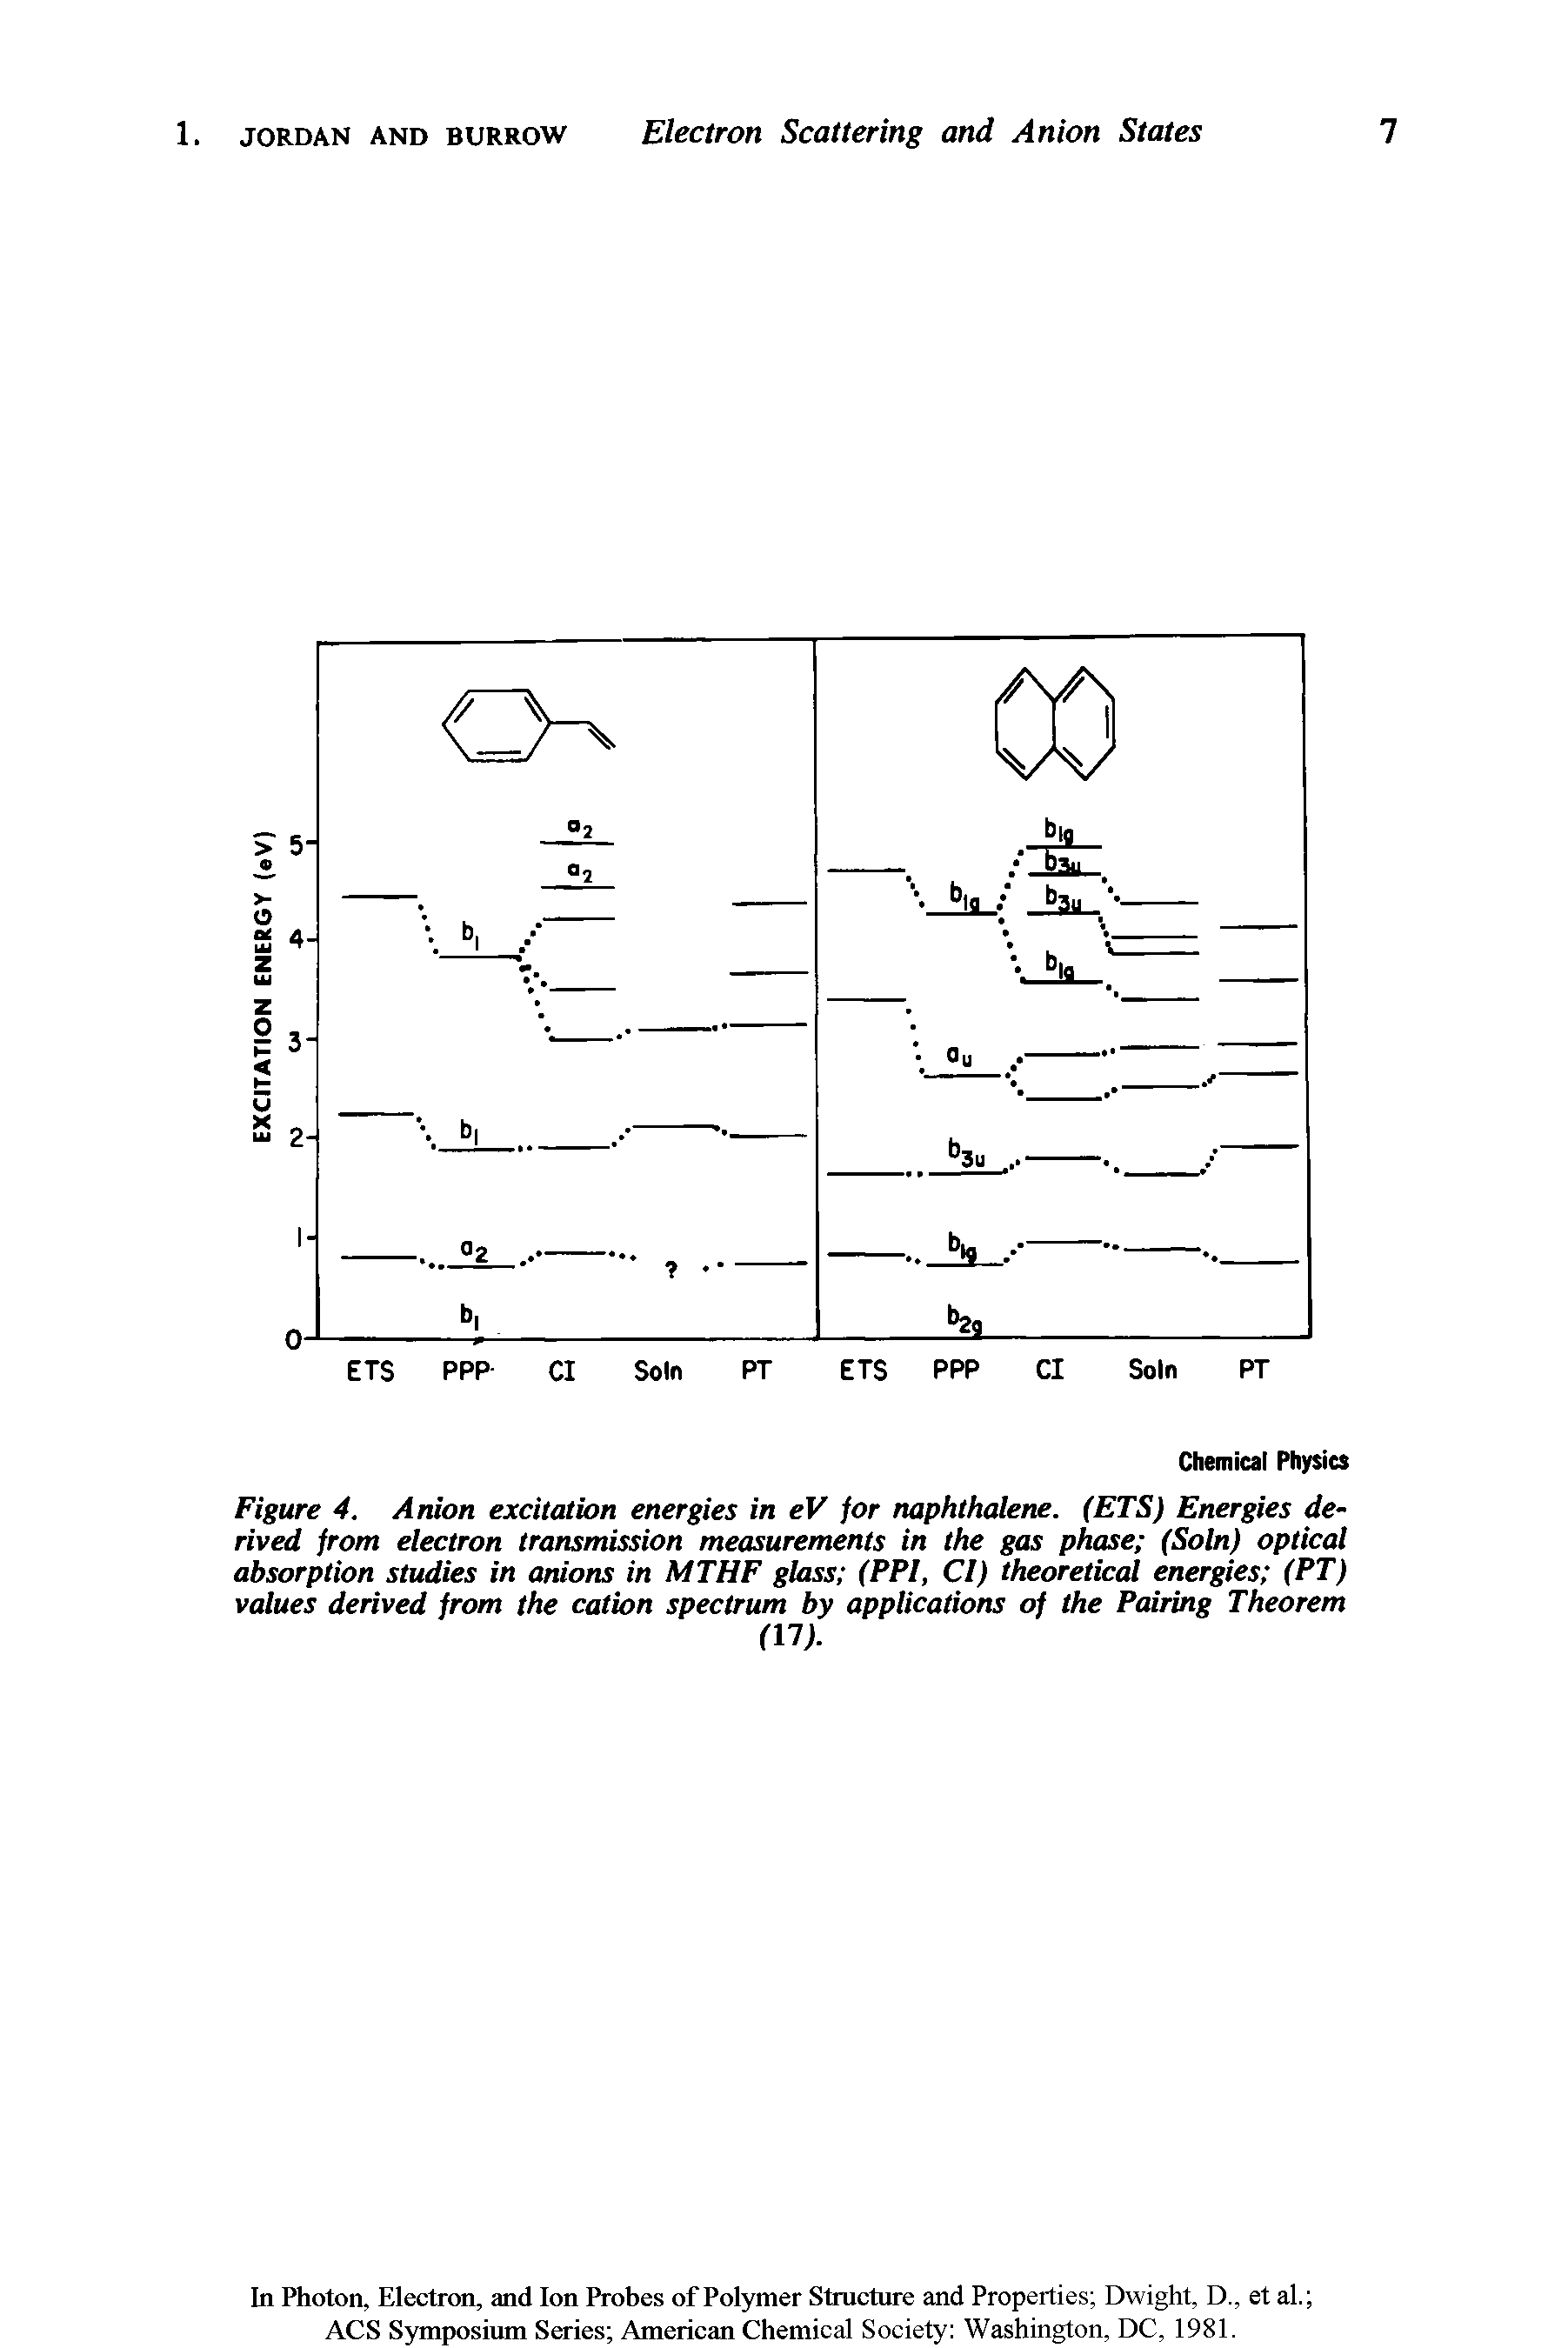 Figure 4. Anion excitation energies in eV for naphthalene. (ETS) Energies derived from electron transmission measurements in the gas phase (Soln) optical absorption studies in anions in MTHF glass (PPI, Cl) theoretical energies (PT) values derived from the cation spectrum by applications of the Pairing Theorem...